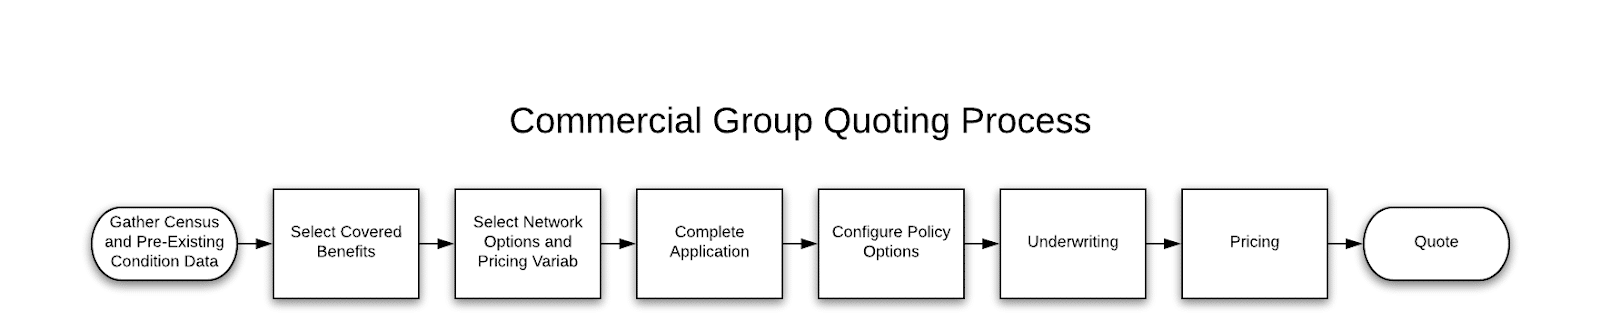 Jet issue' of group quotes using CPQ for health insurance ...